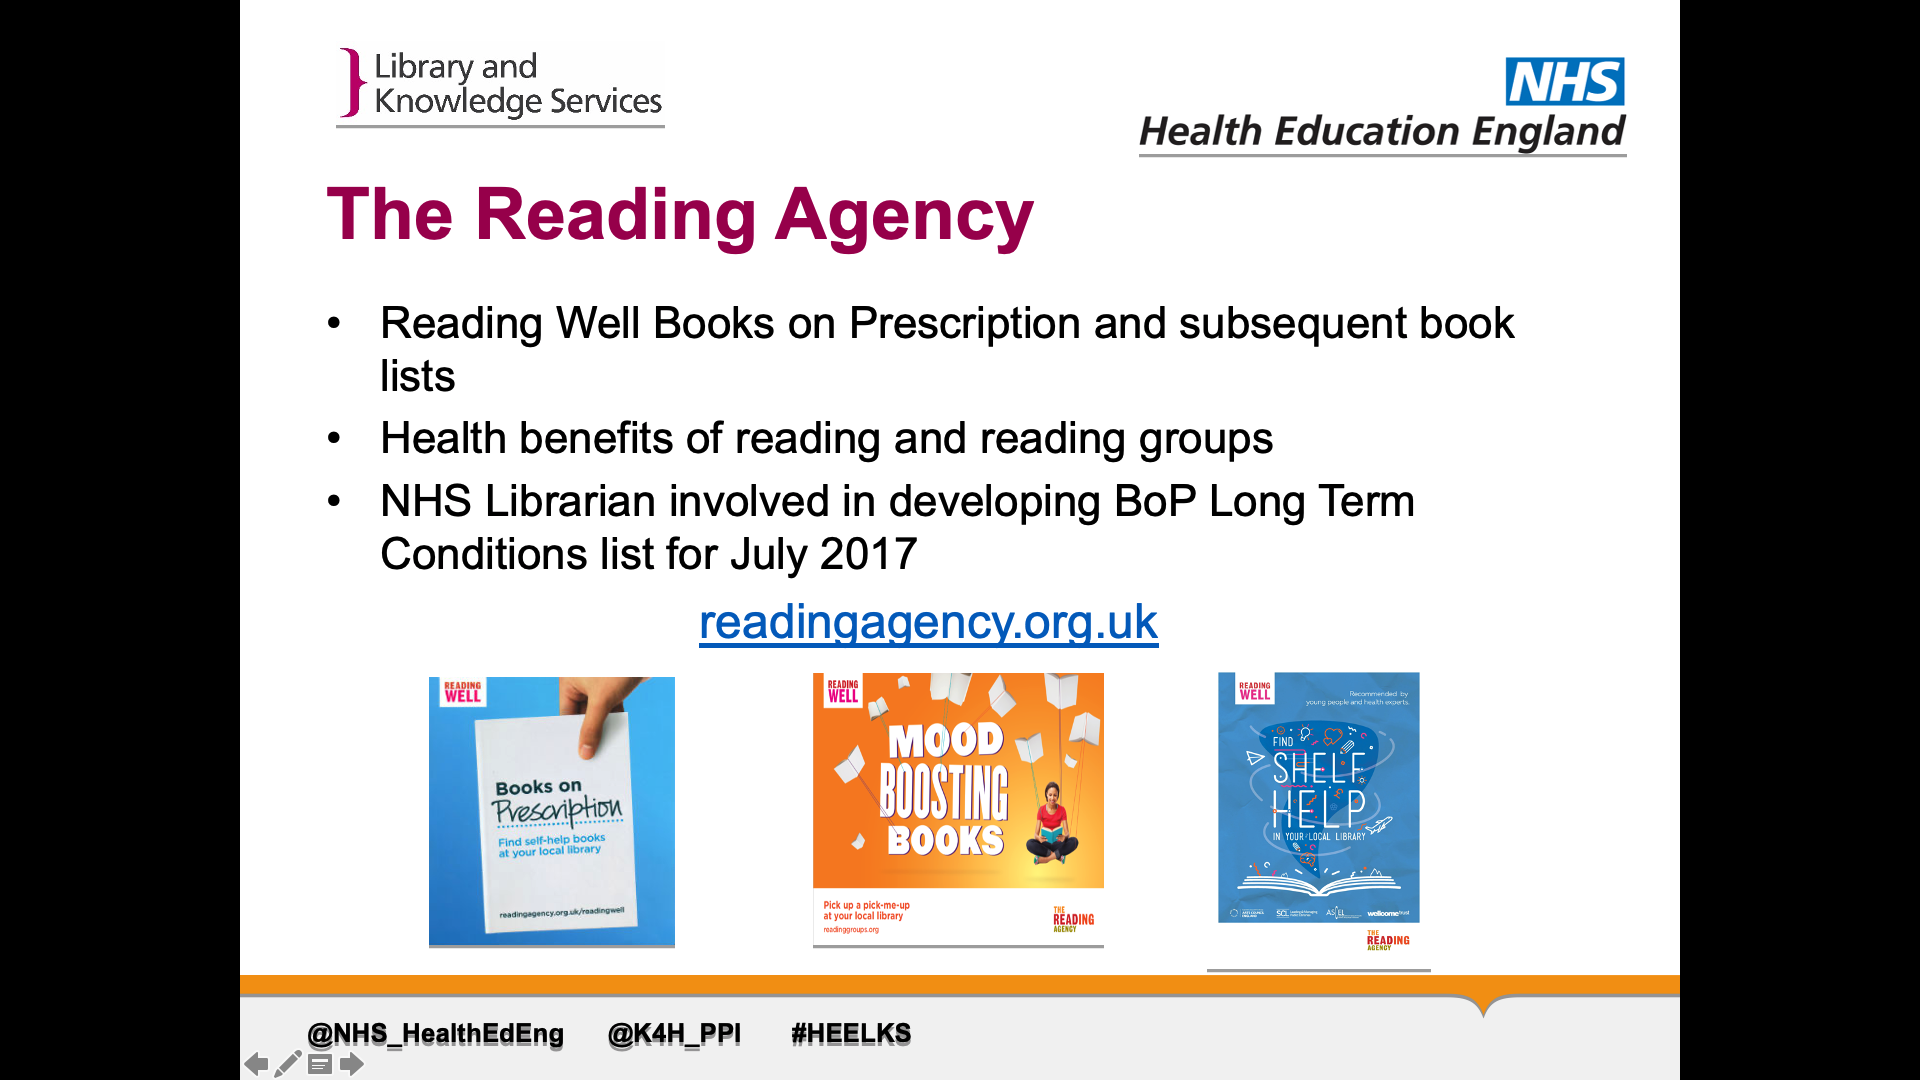 Text on page: 1. Reading Well Books on Prescription and subsequent book lists 2. Health benefits of reading and reading groups 3. NHS Librarian involved in developing BoP Long Term Conditions list for July 2017